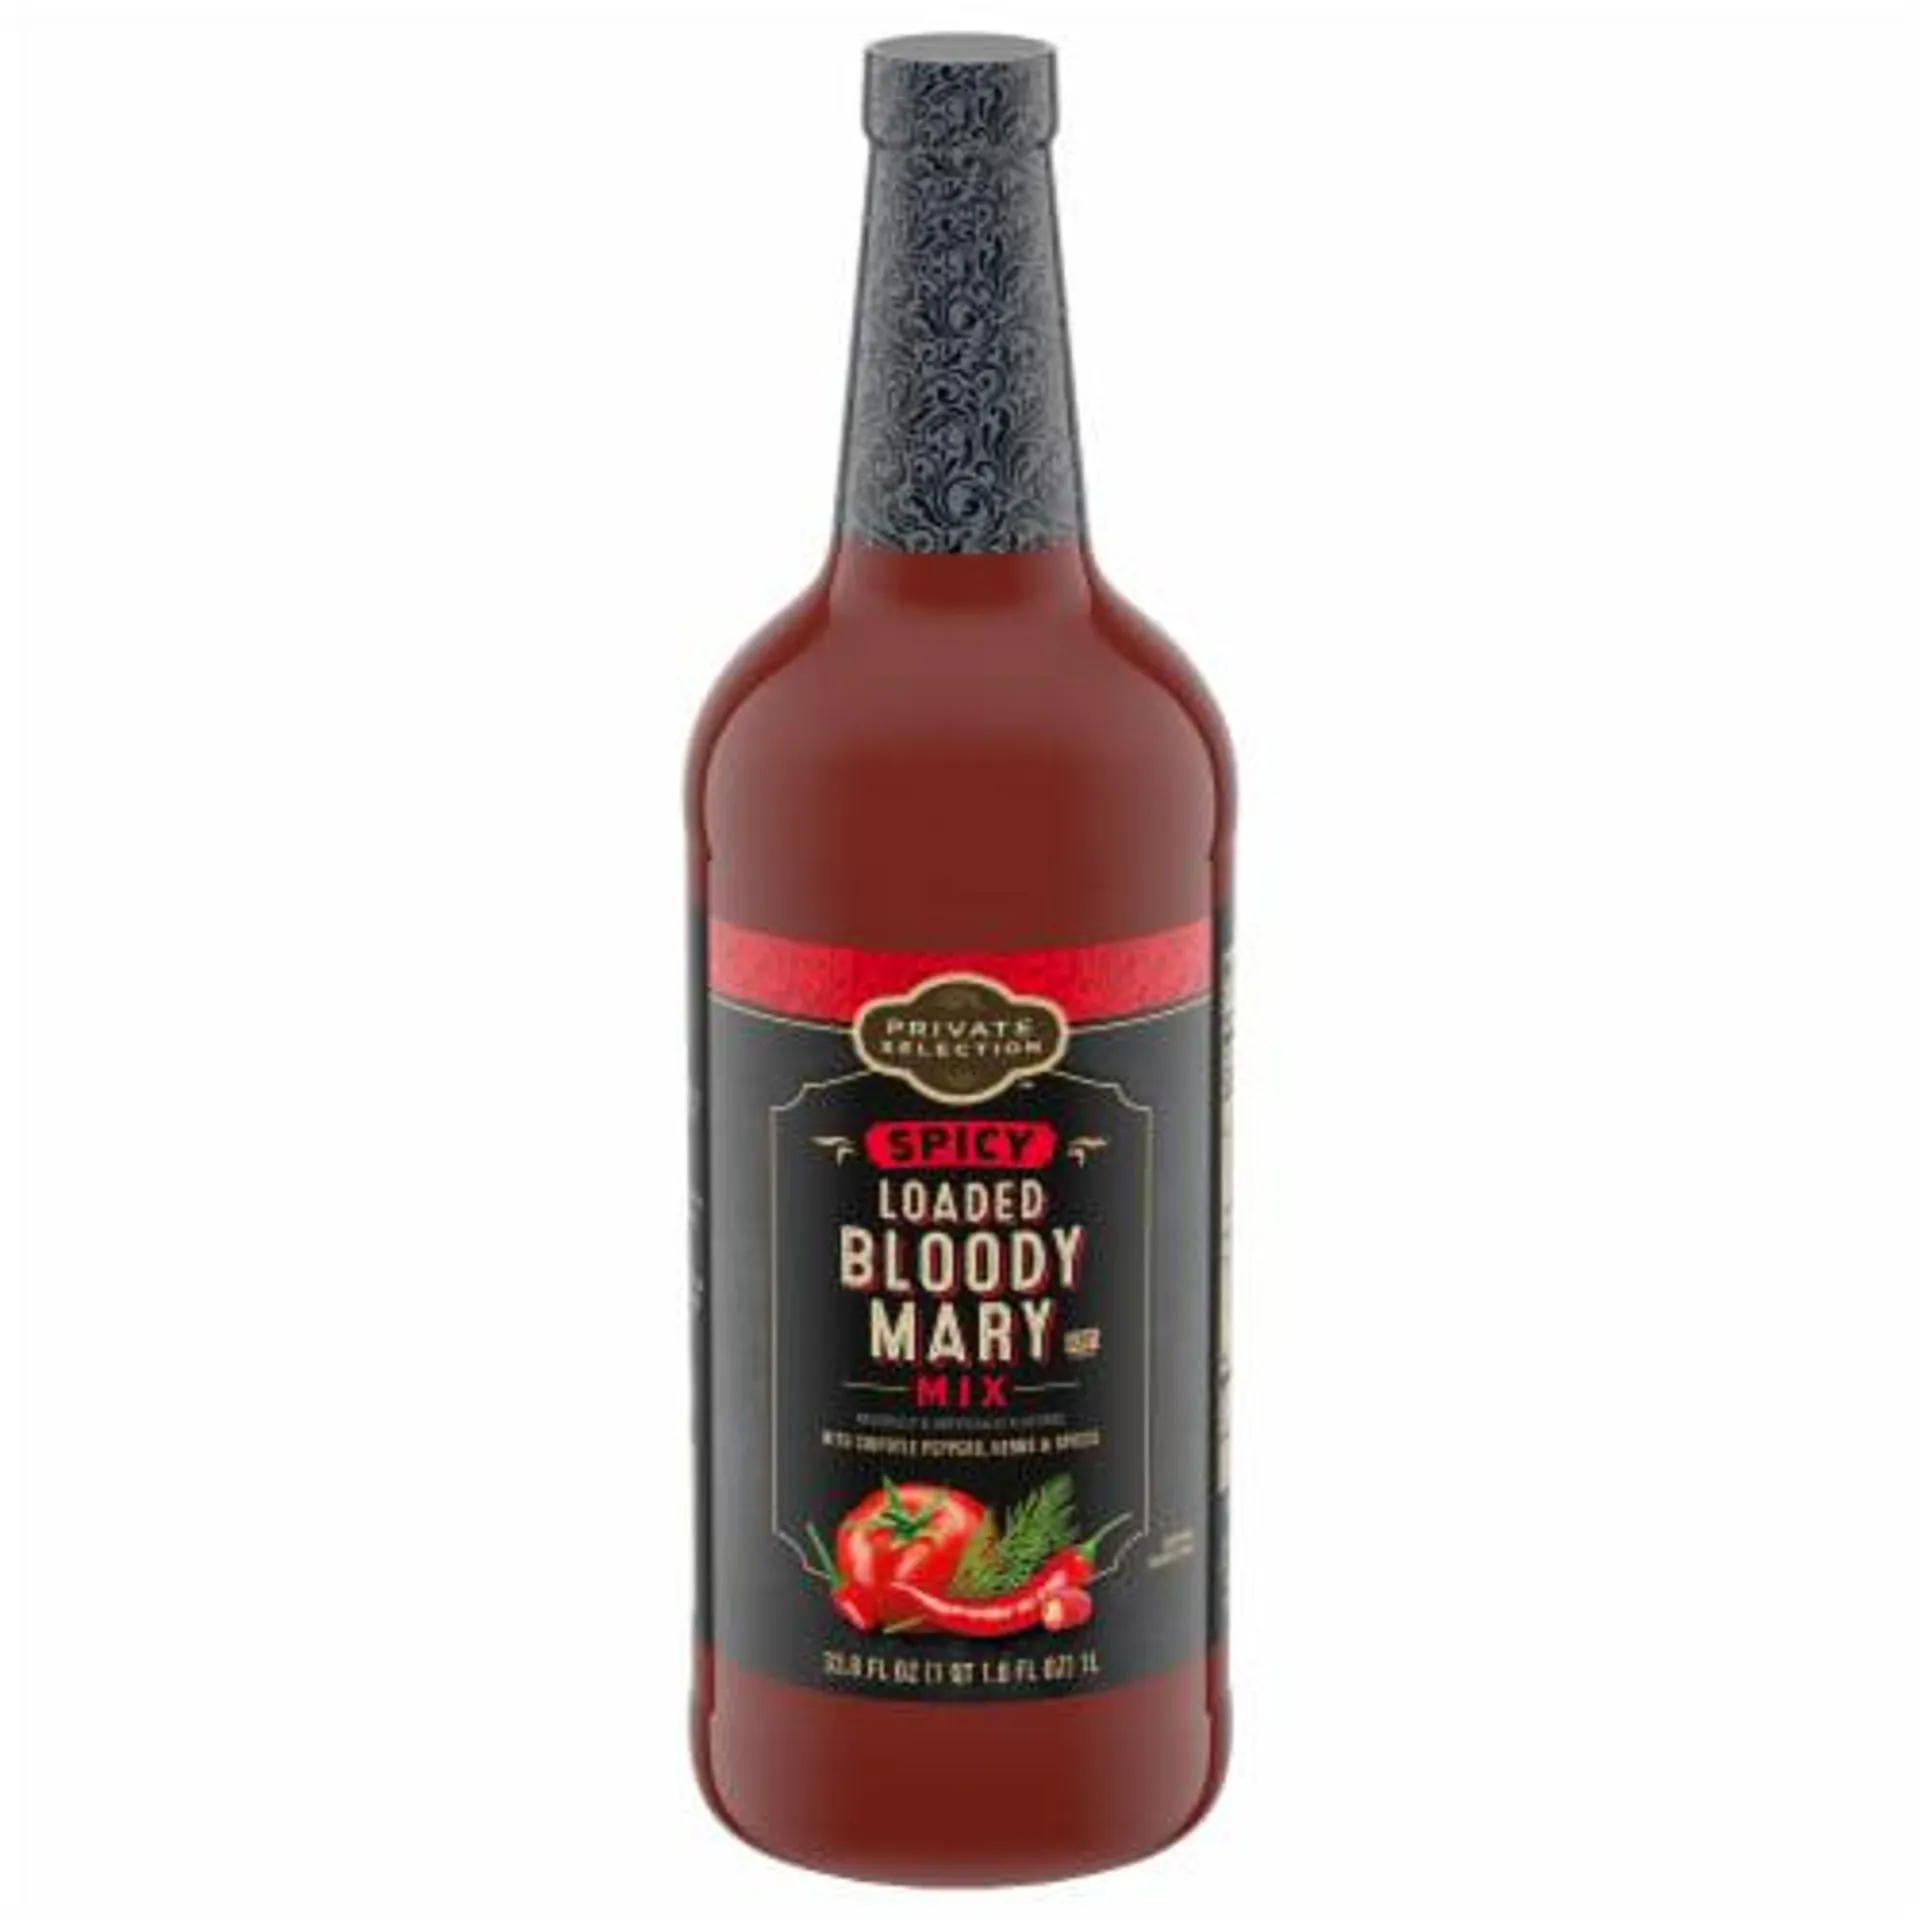 Private Selection Spicy Bloody Mary Mix